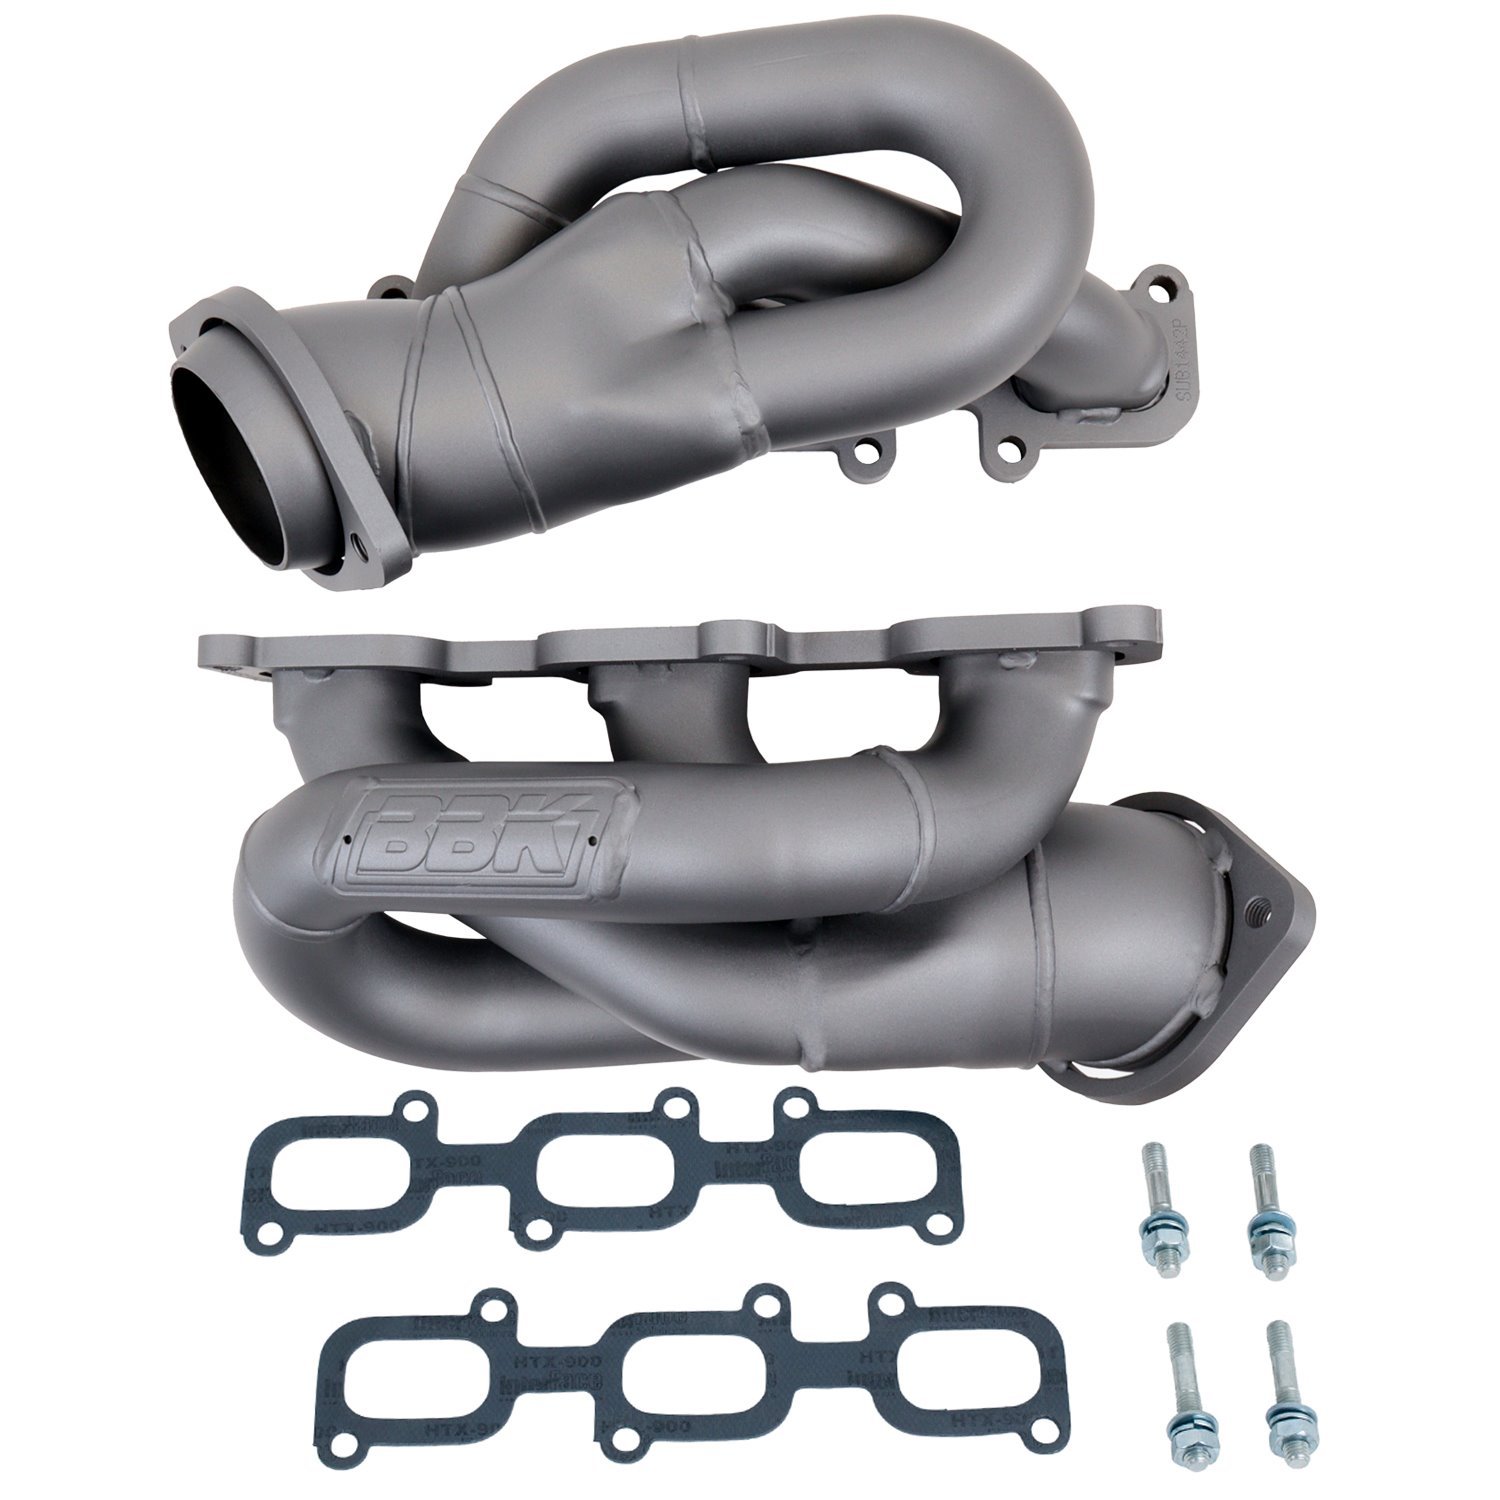 Tuned Shorty Headers 2011-2017 Ford Mustang 3.7L V6